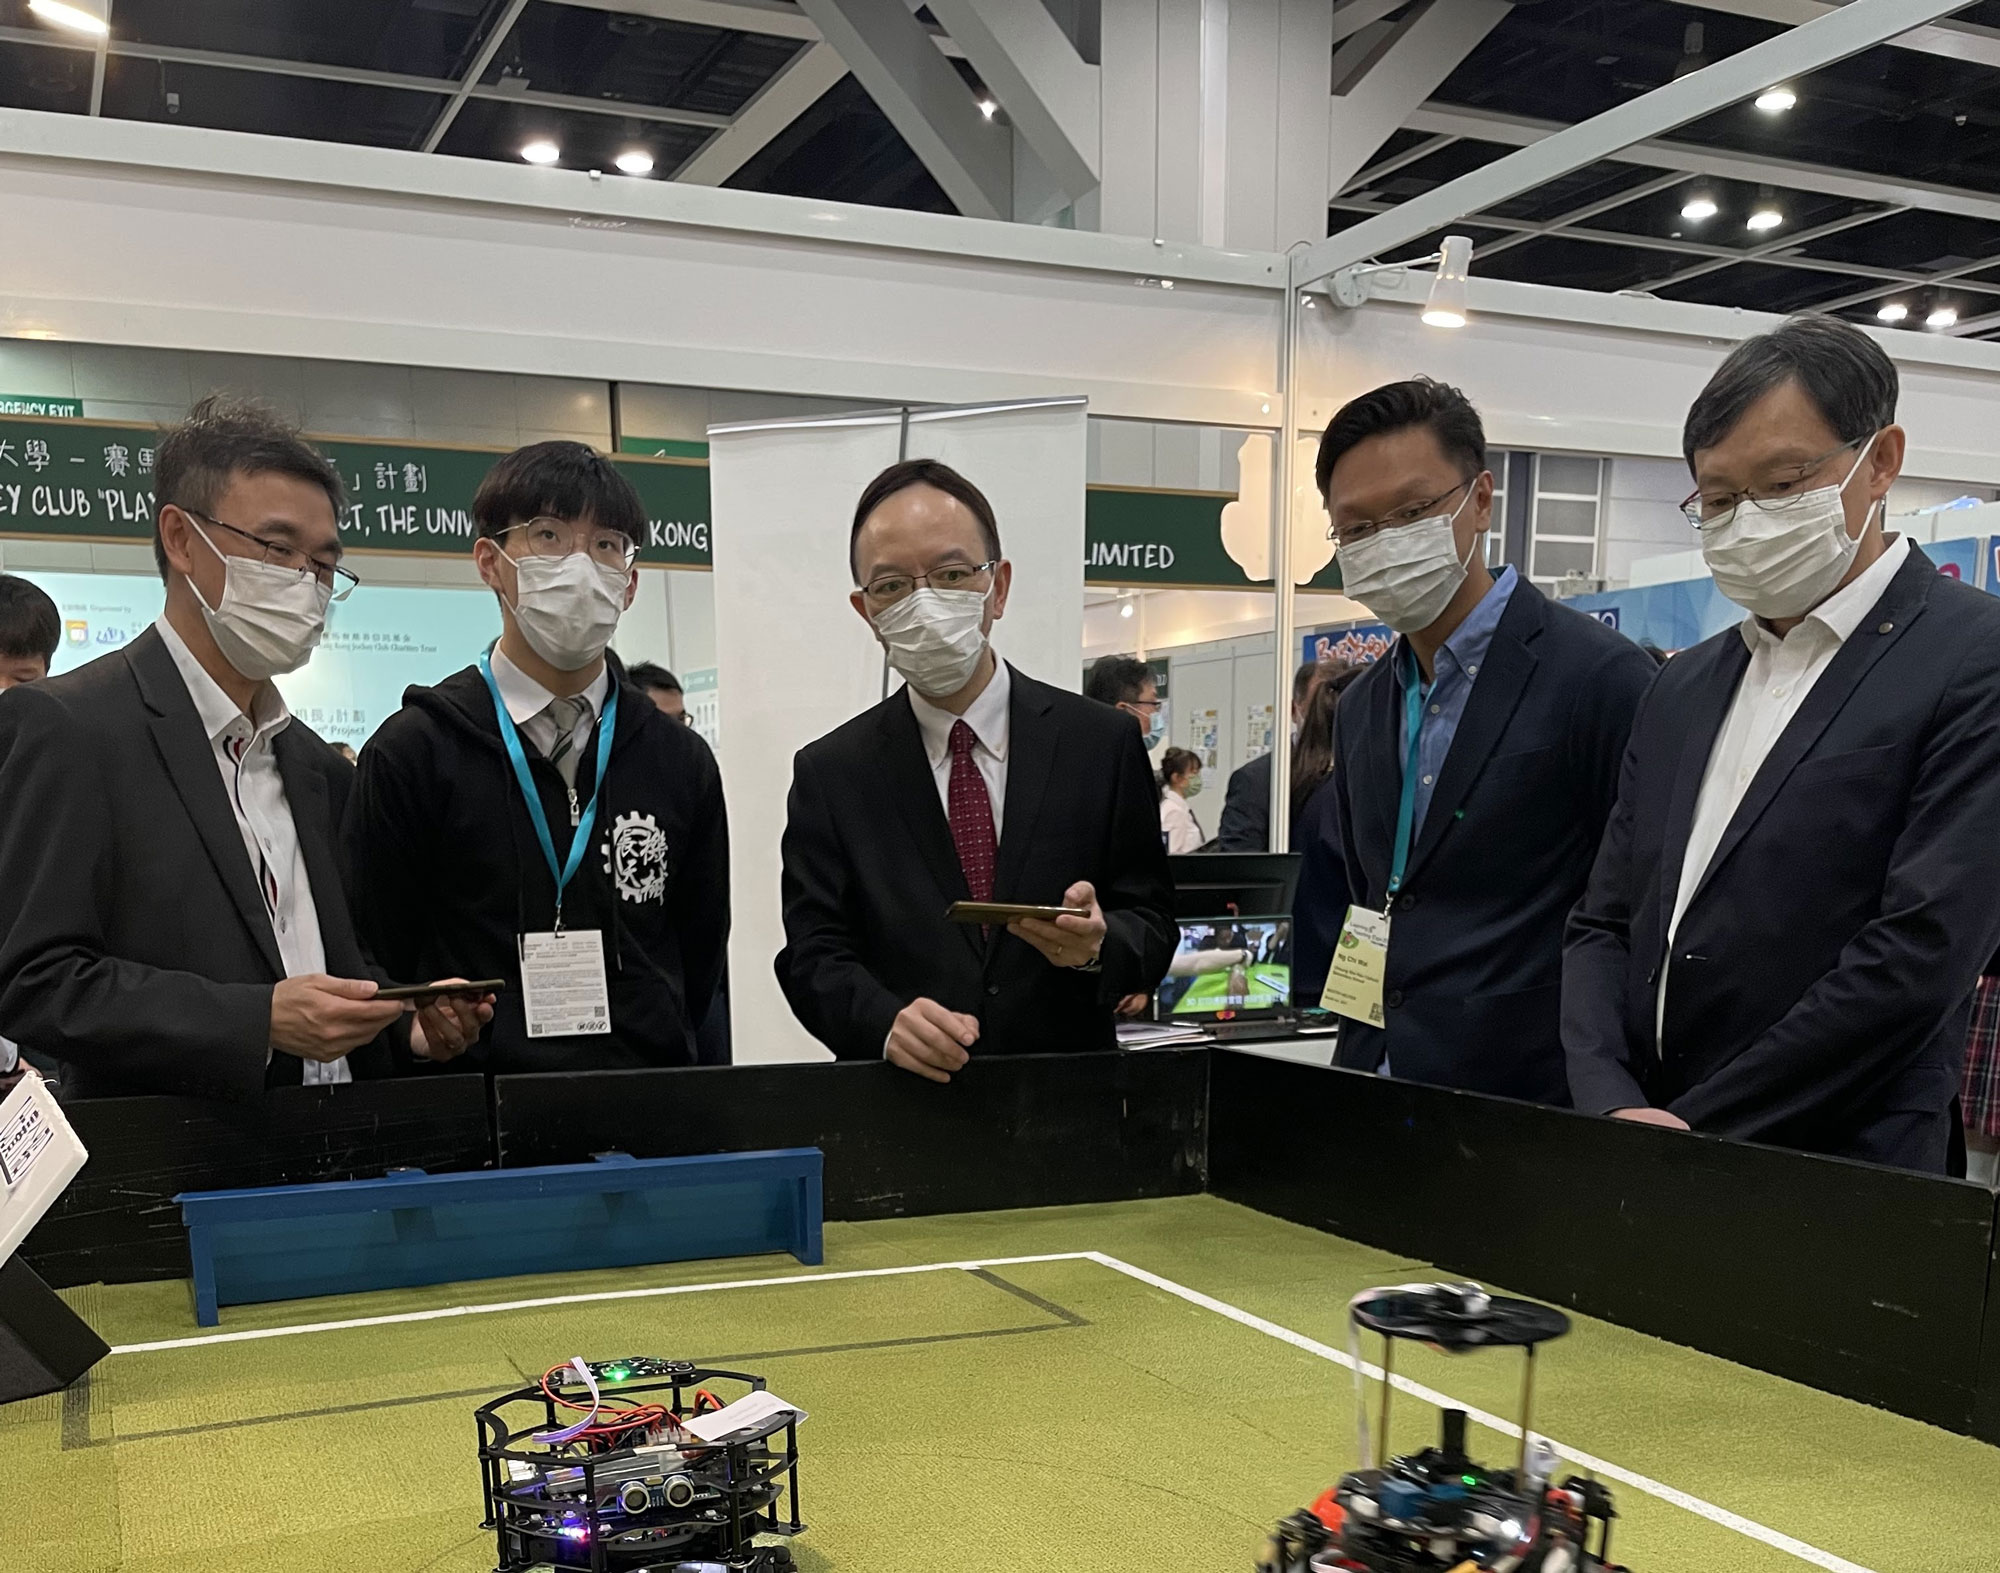 Cheung Sha Wan Catholic Secondary School demonstrated their "Soccer Robot" which won the 1st and 2nd places in the RoboCup Junior Sim 2021 (Asian Region) and was named the Champion of the RoboCup Junior WorldWide 2021 (Soccer Lightweight).